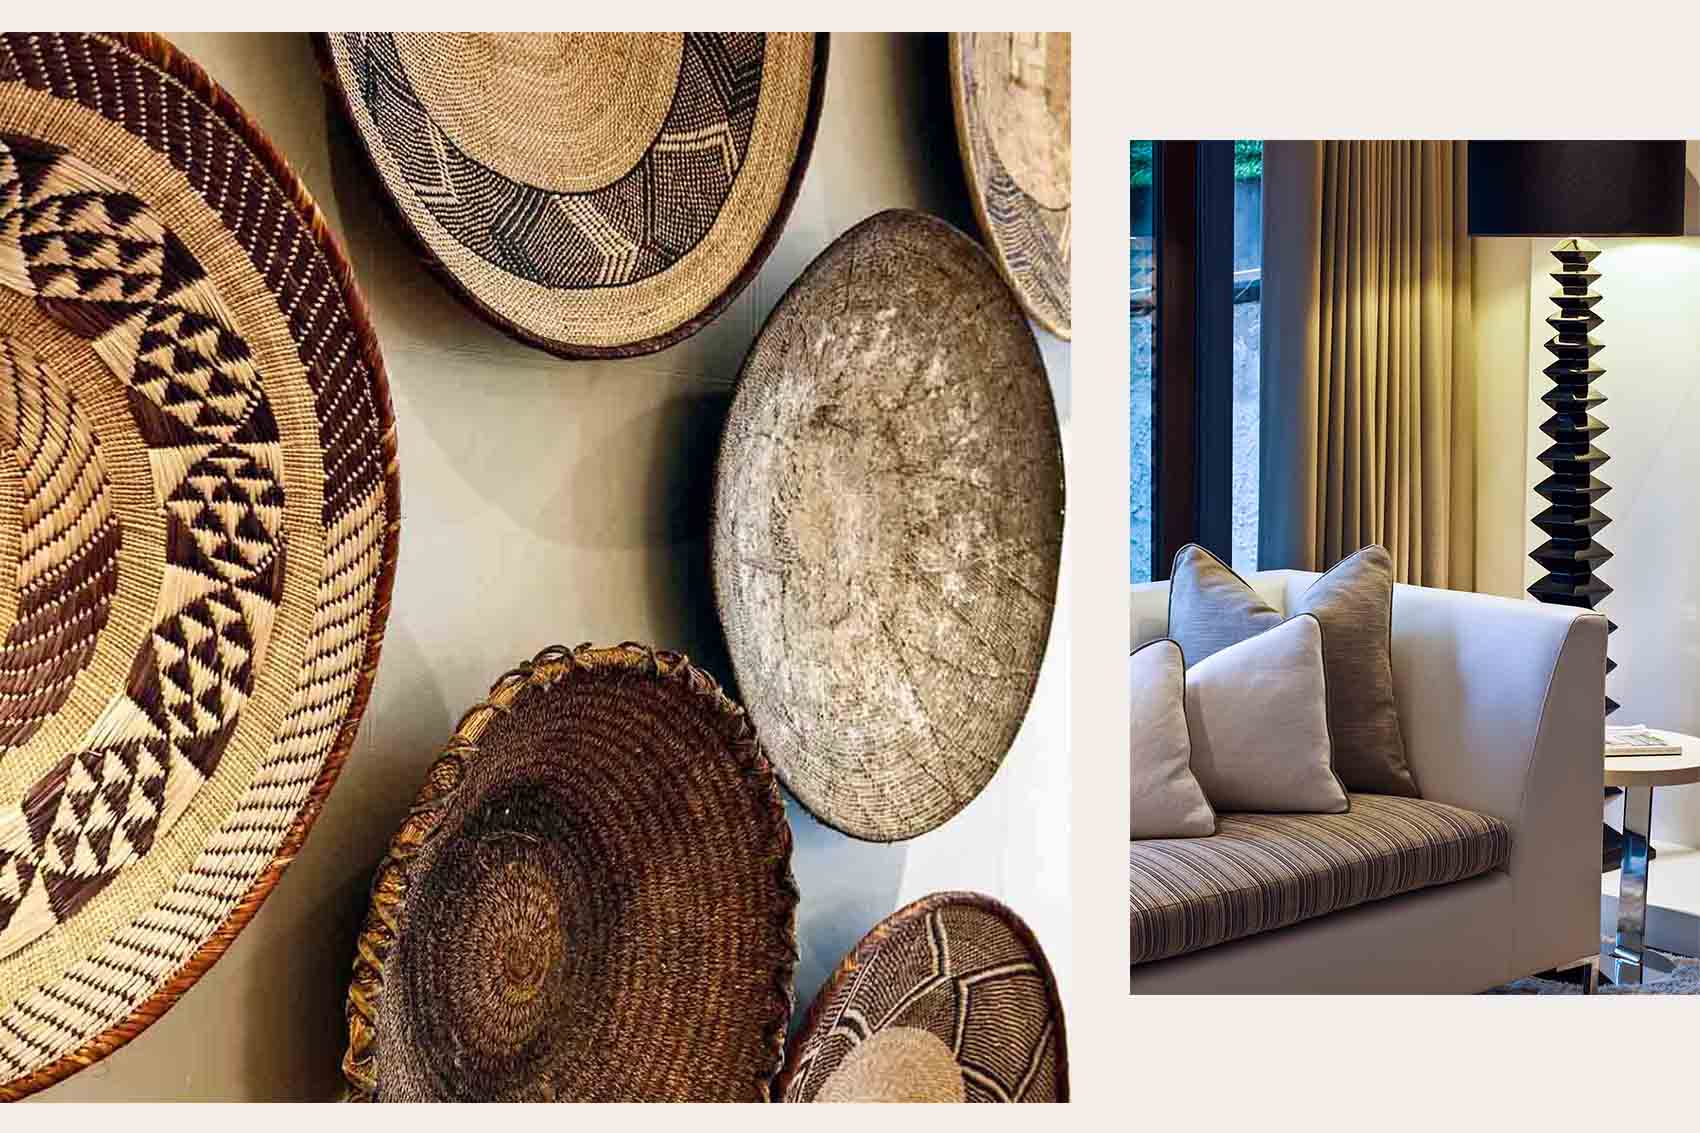 African wall art basket collection, bespoke sofa in white leather and ethnic inspired cushions